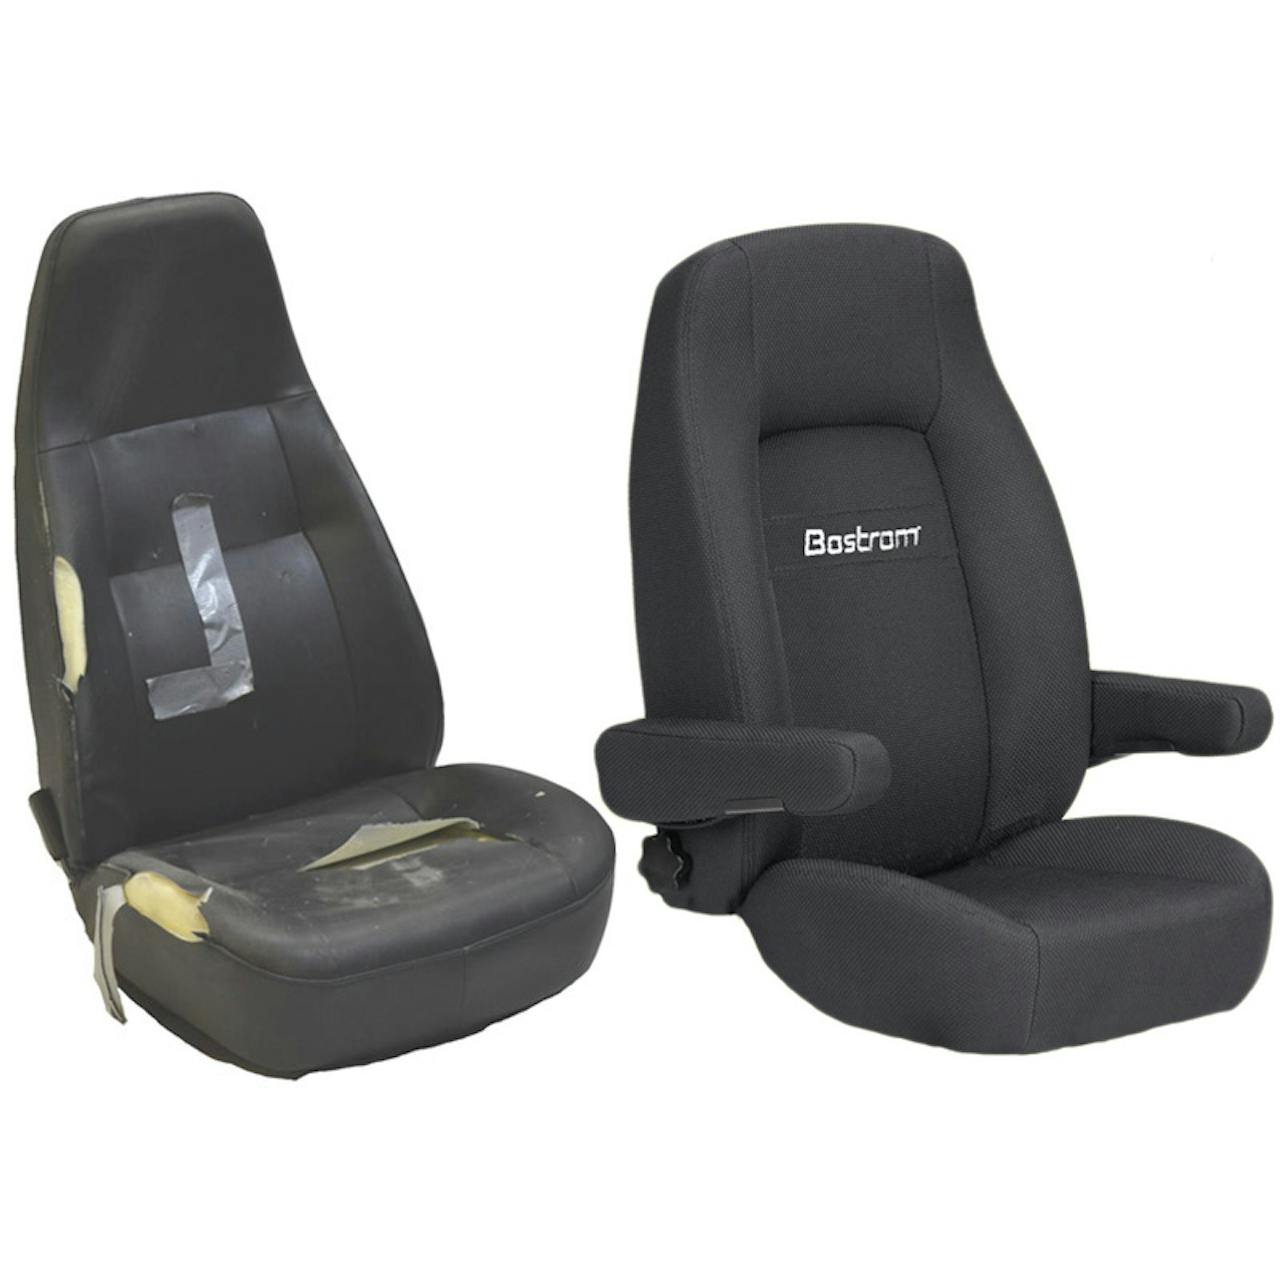 https://raneys-cdn11.imgix.net/images/stencil/original/products/196995/111702/Bostrom_Seat_Cushion__Cover_FRED_Refresh_Kit_20356__68138.1498241268.jpg?auto=compress,format&w=1280